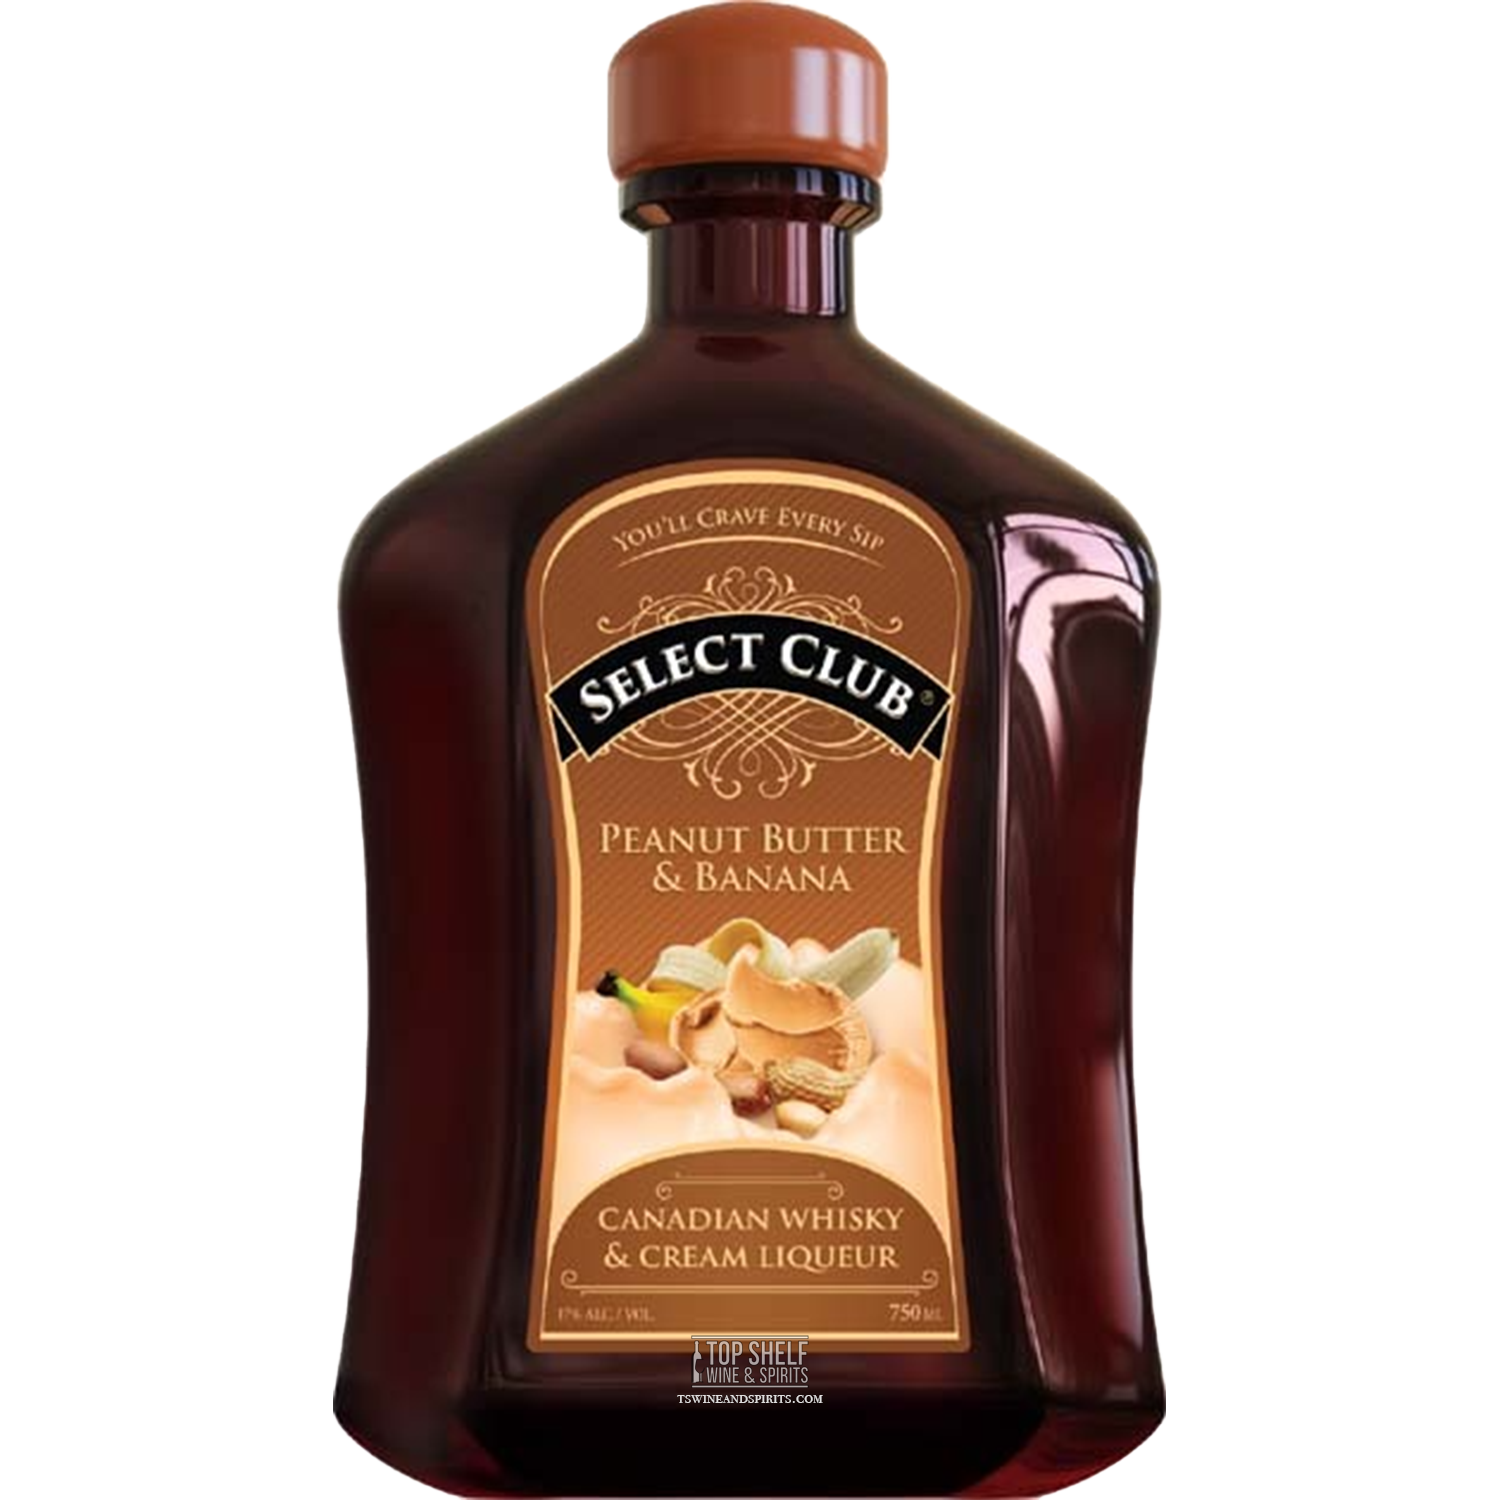 Select Club Peanut Butter and Banana Whisky & Cream